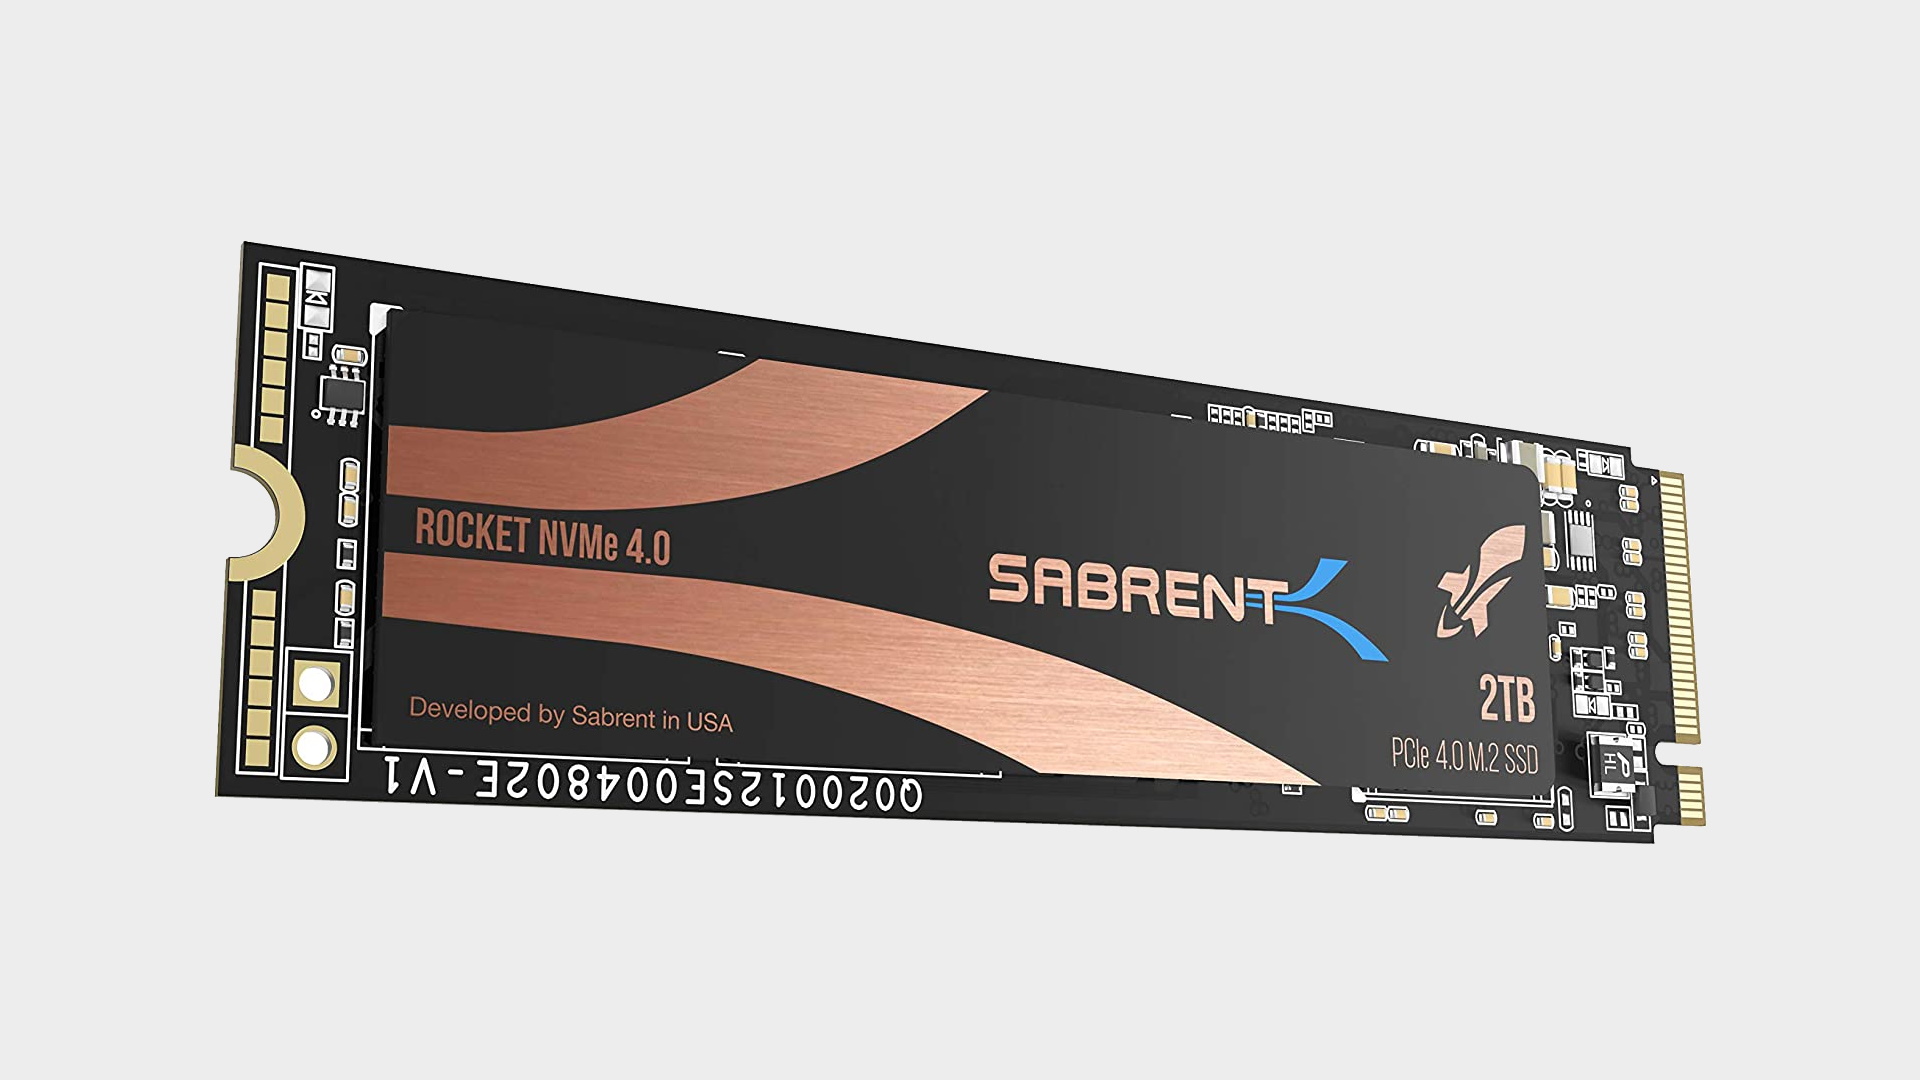 Sabrent Rocket 4 2TB in front of a gray background.